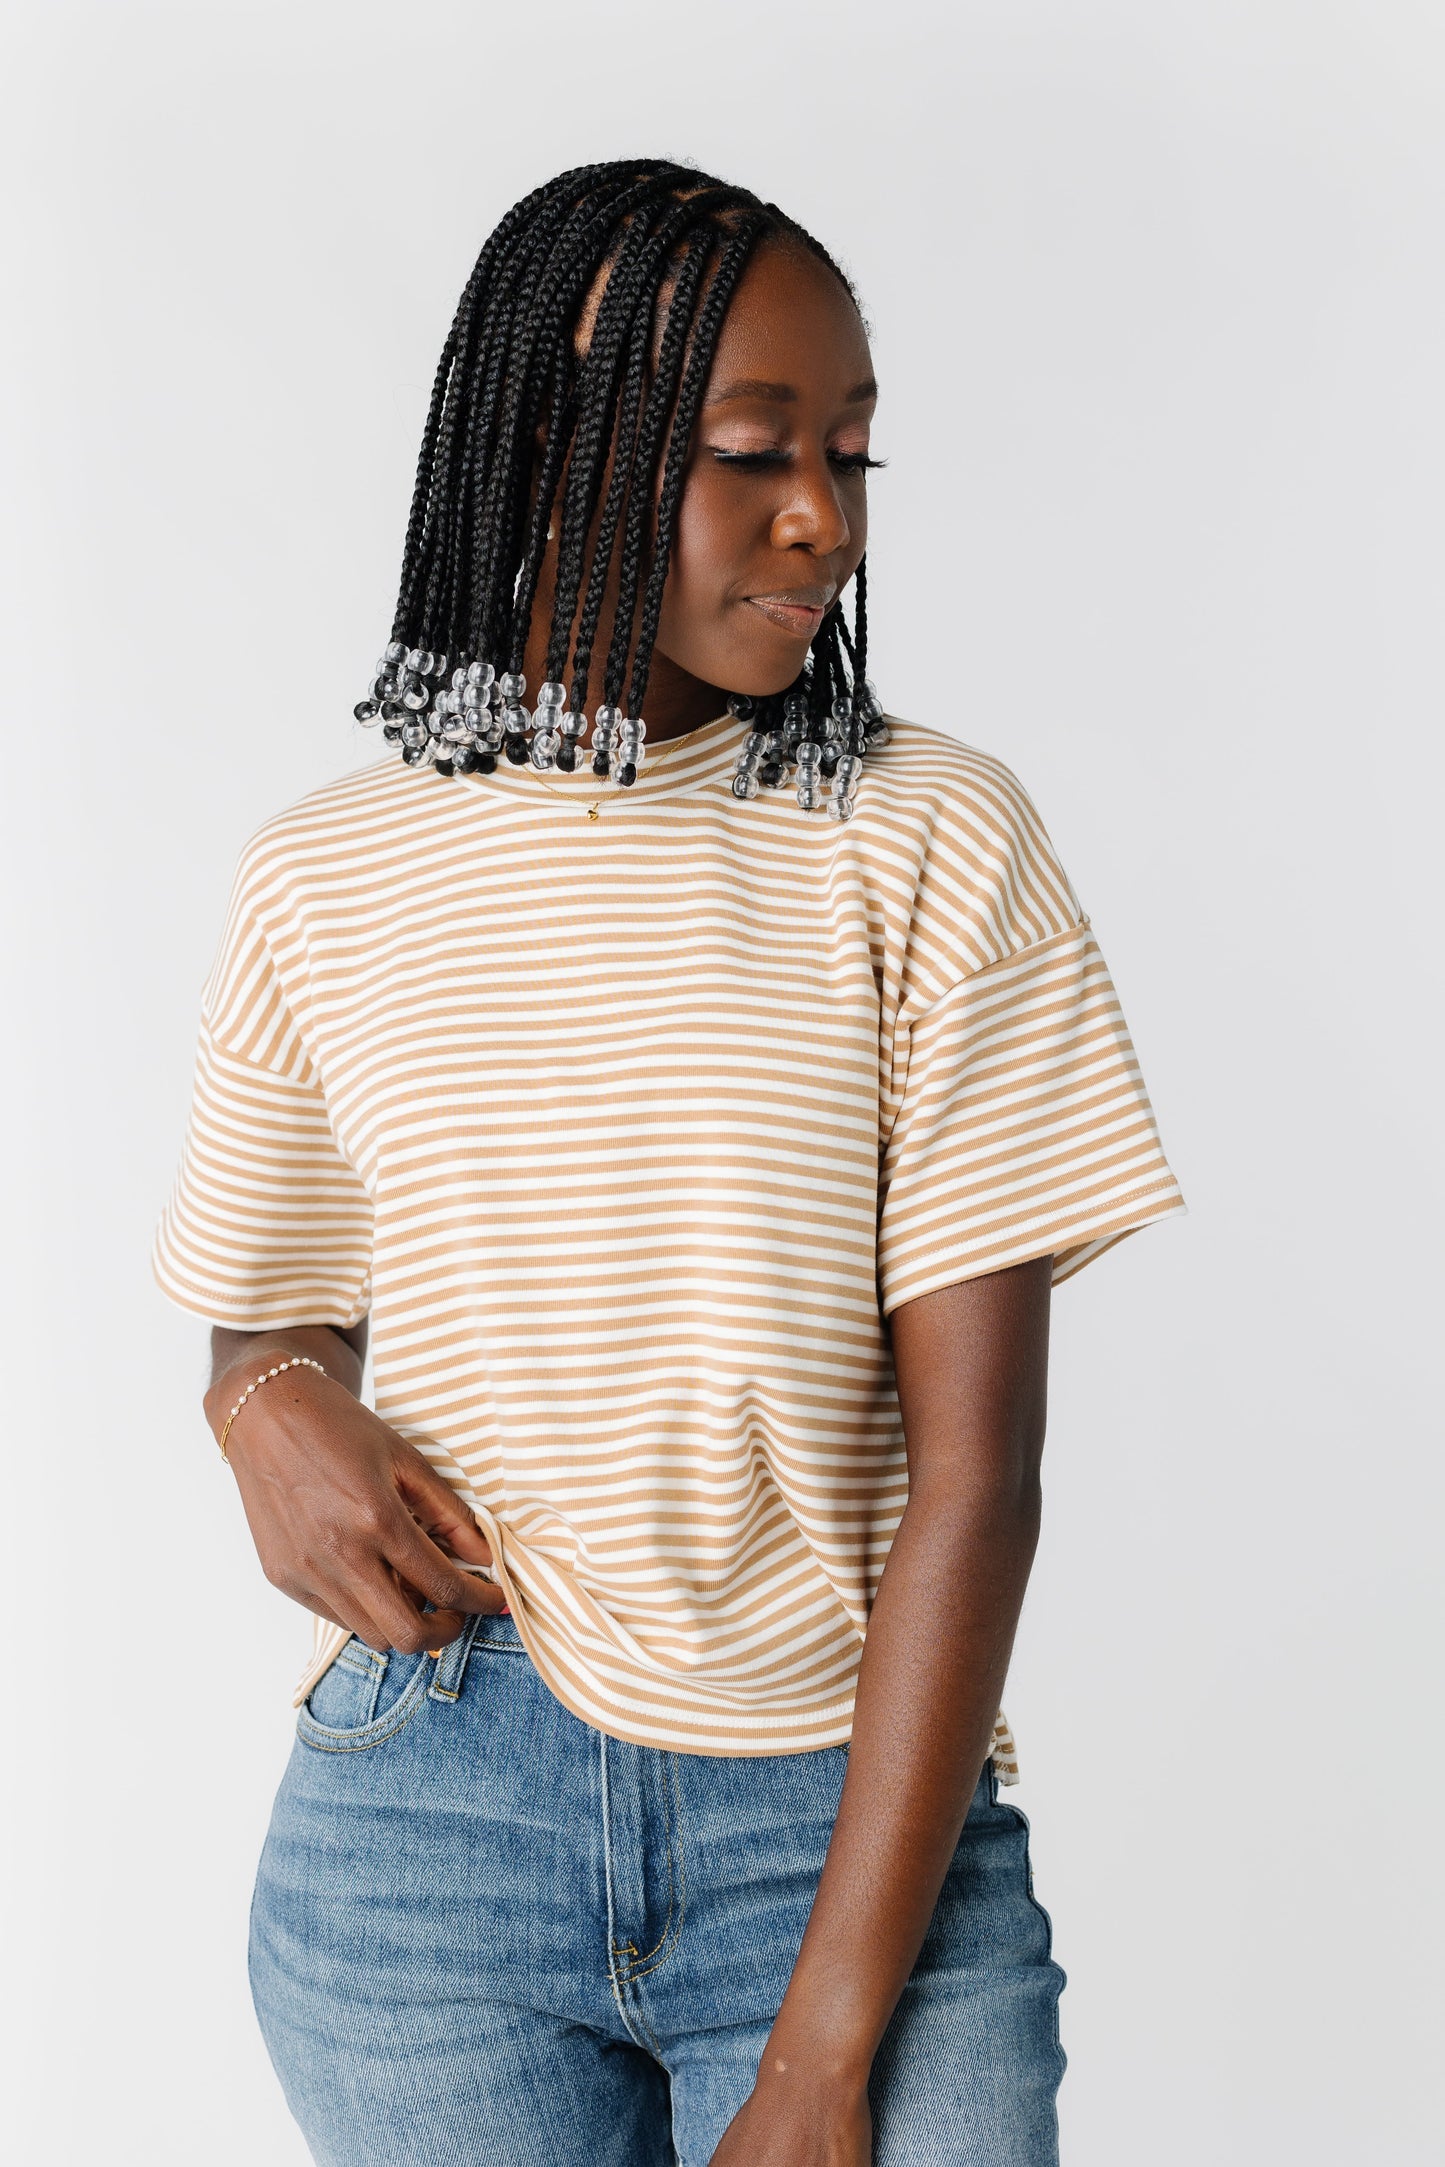 Rolla's Stripe Boxy Tee WOMEN'S T-SHIRT Things Between Ivory/Apricot L 